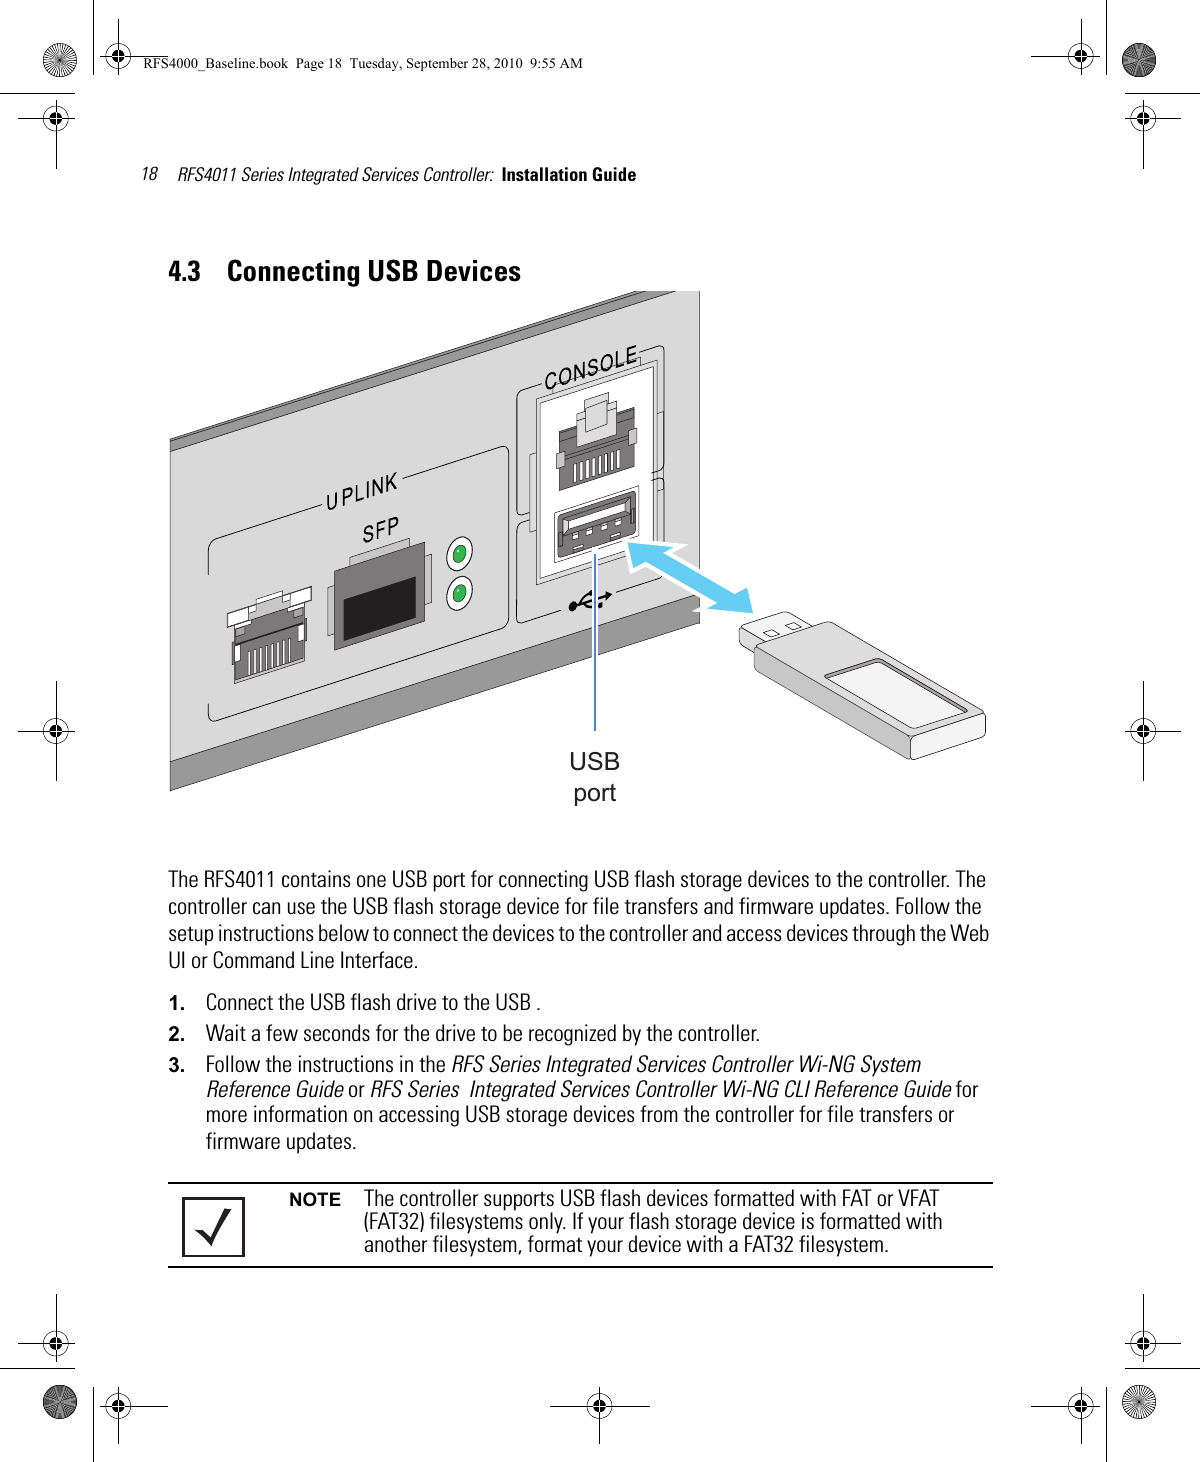 RFS4011 Series Integrated Services Controller:  Installation Guide 184.3    Connecting USB DevicesThe RFS4011 contains one USB port for connecting USB flash storage devices to the controller. The controller can use the USB flash storage device for file transfers and firmware updates. Follow the setup instructions below to connect the devices to the controller and access devices through the Web UI or Command Line Interface. 1. Connect the USB flash drive to the USB .2. Wait a few seconds for the drive to be recognized by the controller.3. Follow the instructions in the RFS Series Integrated Services Controller Wi-NG System Reference Guide or RFS Series  Integrated Services Controller Wi-NG CLI Reference Guide for more information on accessing USB storage devices from the controller for file transfers or firmware updates.NOTE The controller supports USB flash devices formatted with FAT or VFAT (FAT32) filesystems only. If your flash storage device is formatted with another filesystem, format your device with a FAT32 filesystem.USBportRFS4000_Baseline.book  Page 18  Tuesday, September 28, 2010  9:55 AM